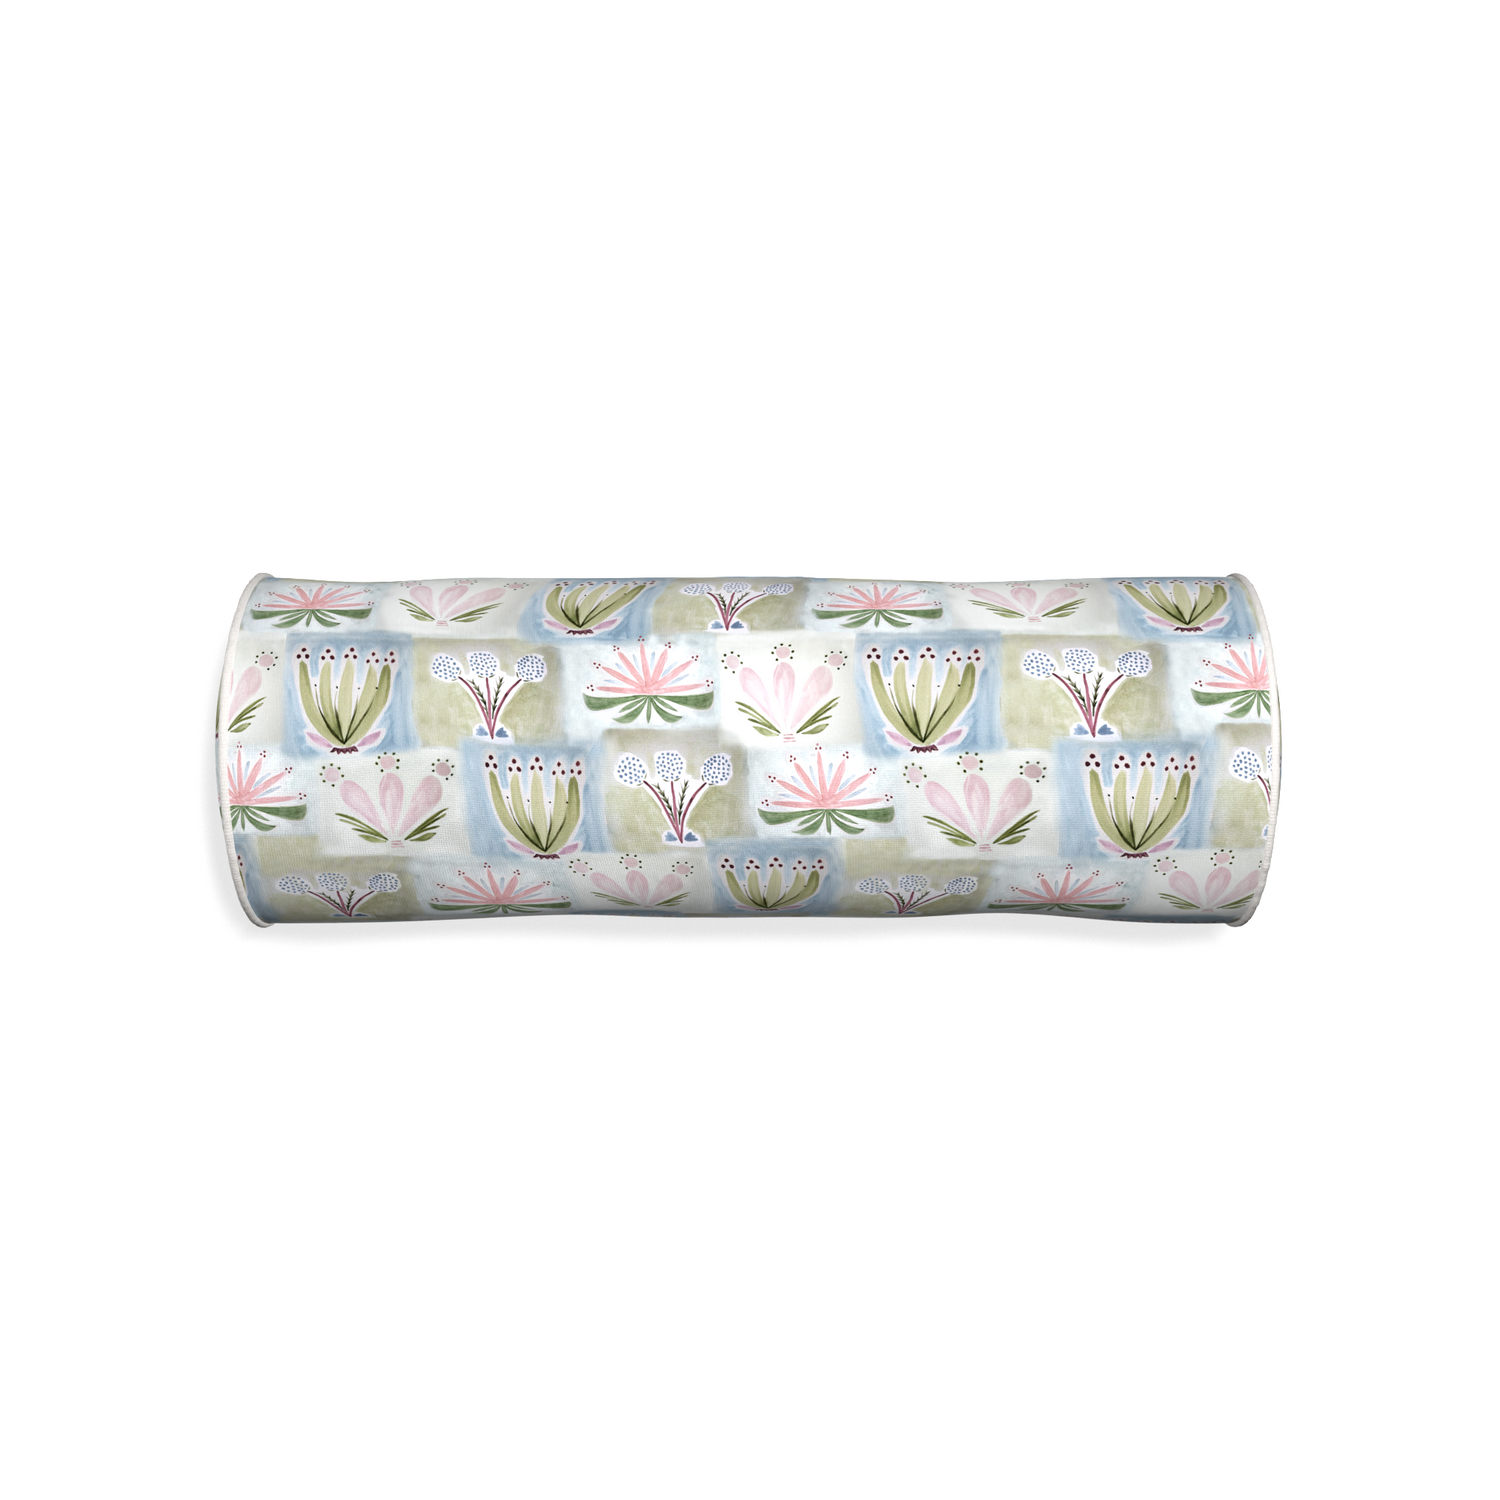 Bolster harper custom hand-painted floralpillow with snow piping on white background